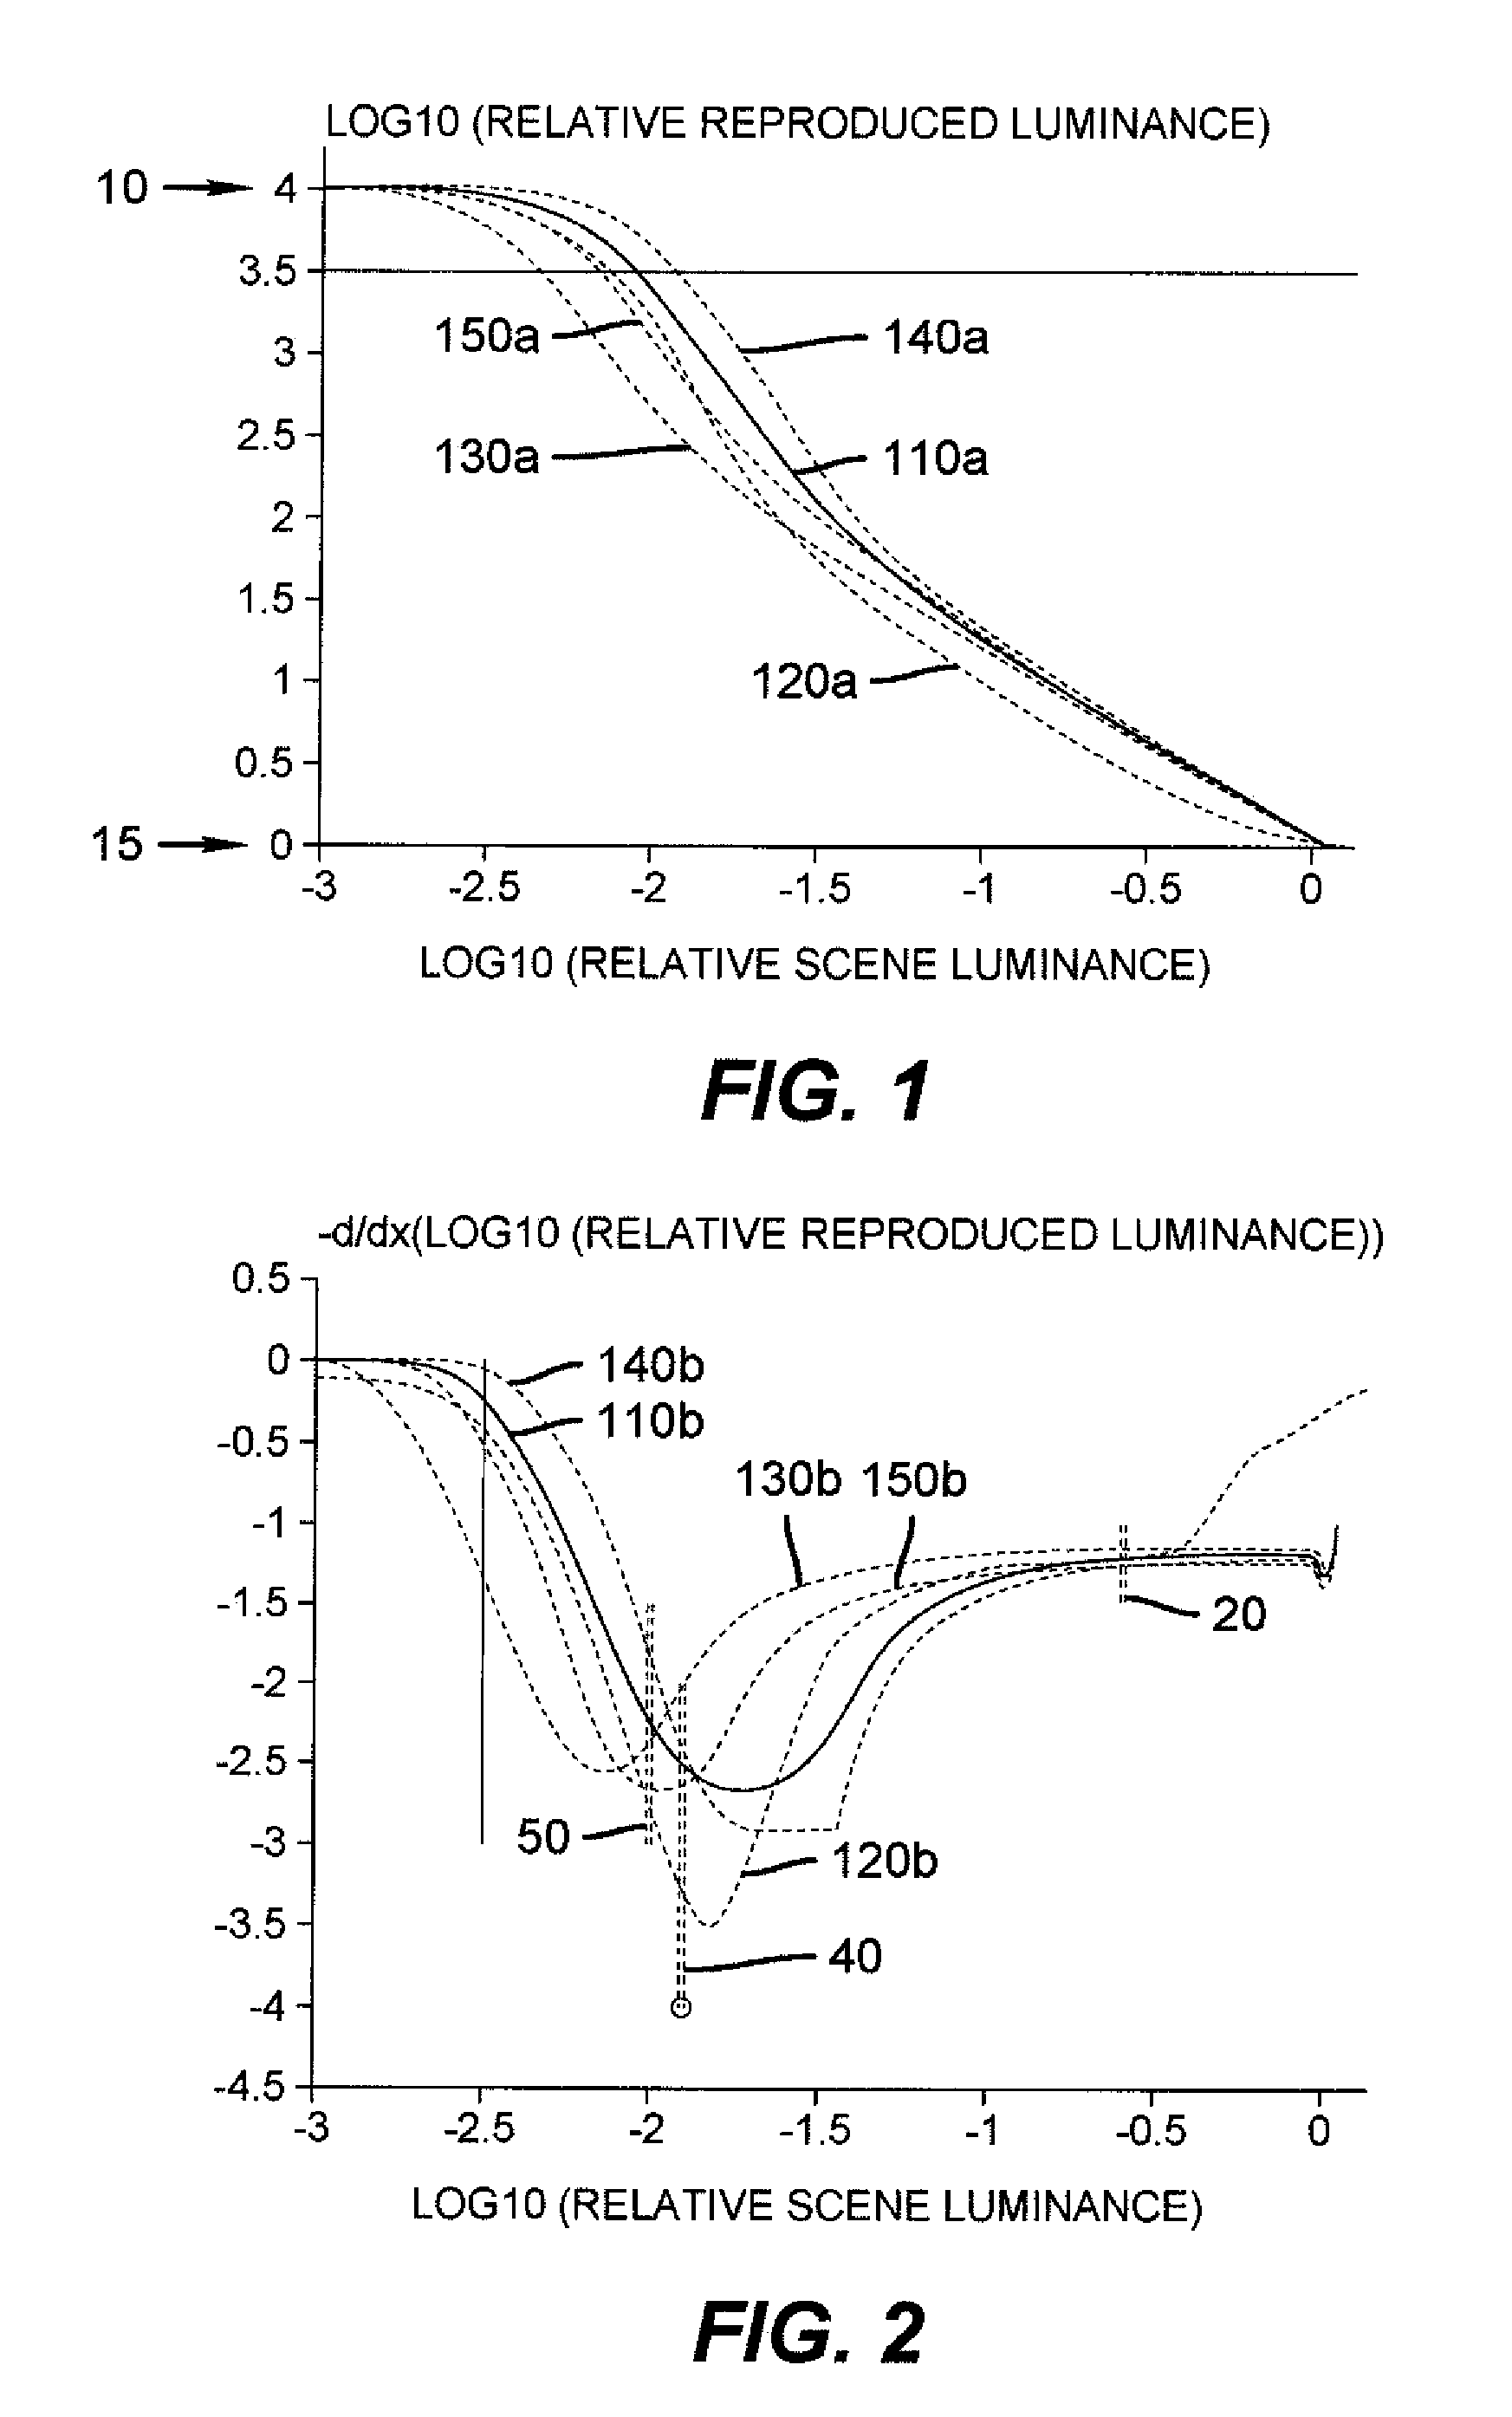 Preferential tone scale for electronic displays